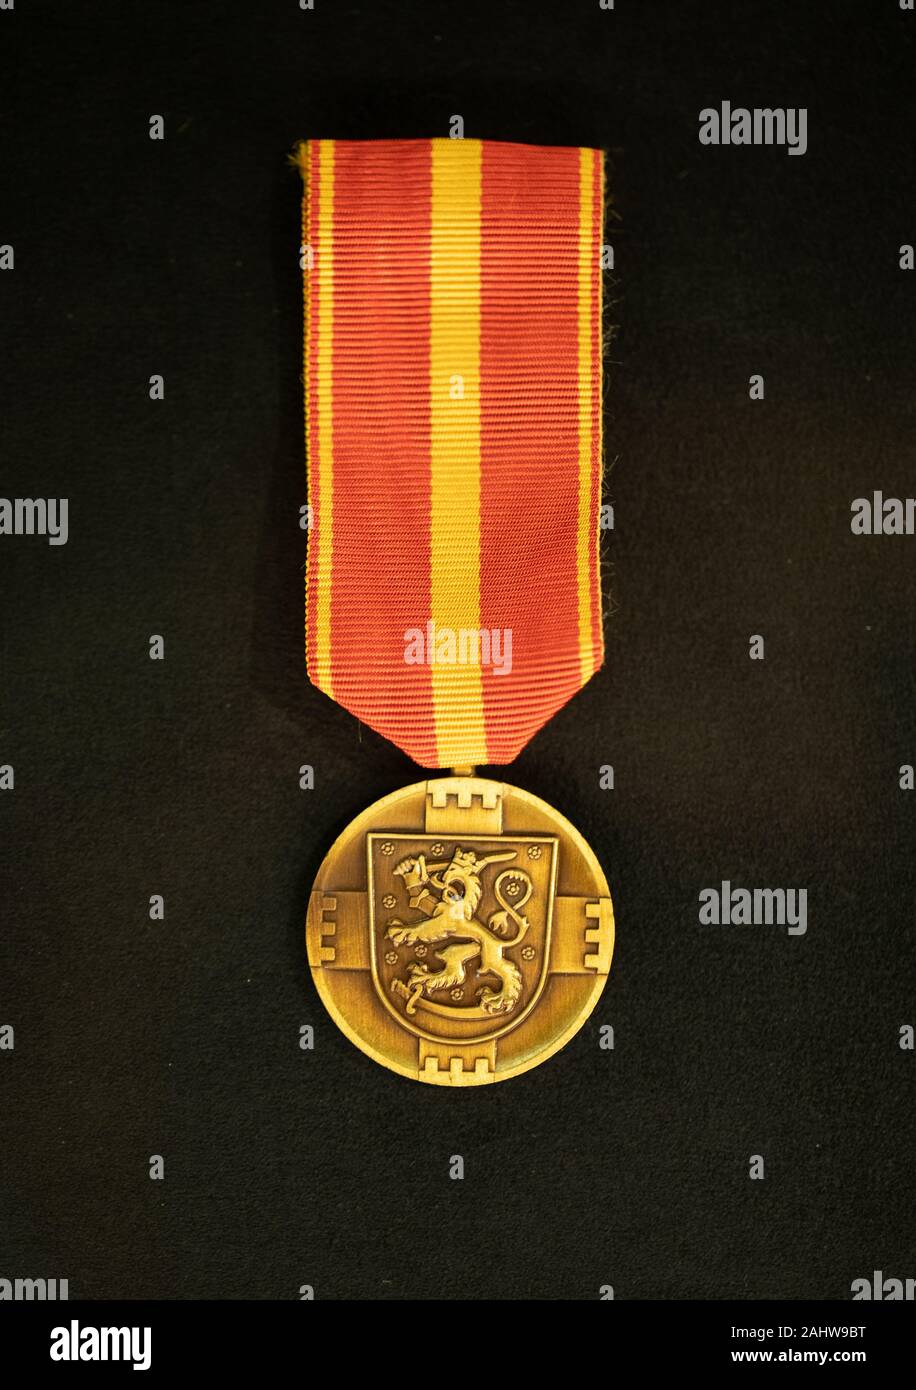 Finnish Military Medal of Merit instituted in 1977, conferred to President Mauno Koivisto on 4th June 1980. Stock Photo